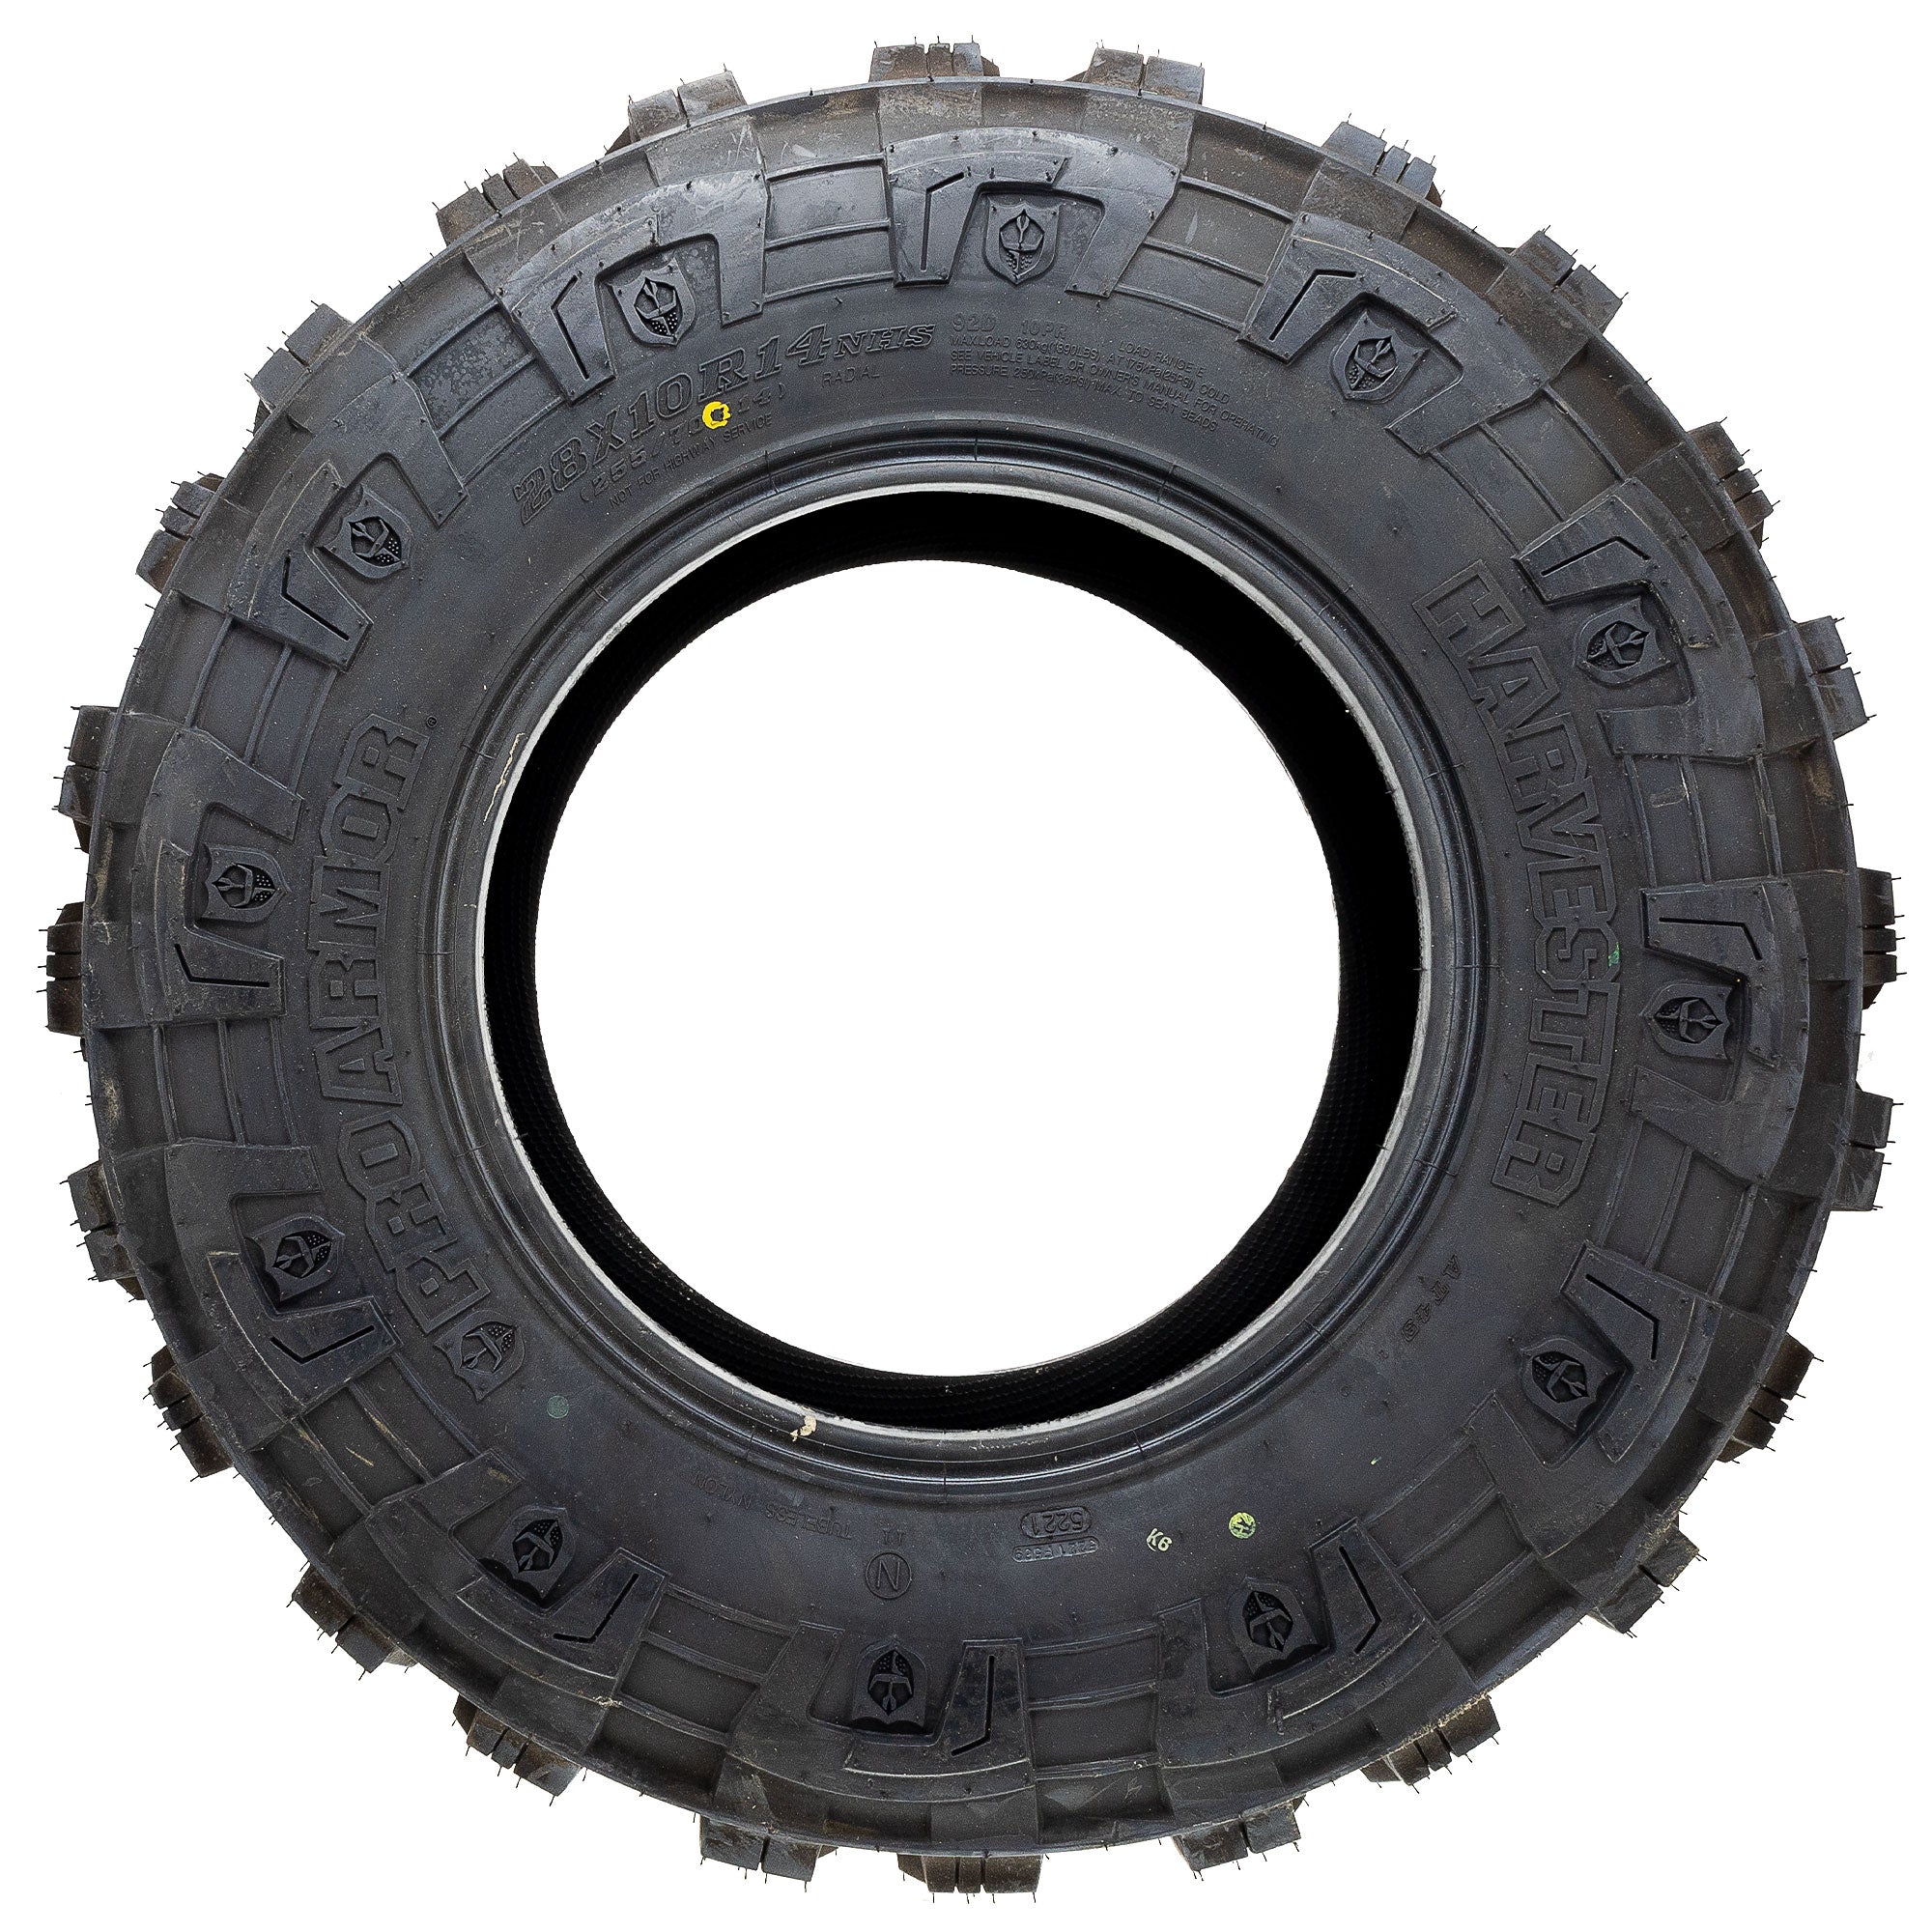 Pro Armor 5416347 Harvester Tire, Front Rear 28x10R14